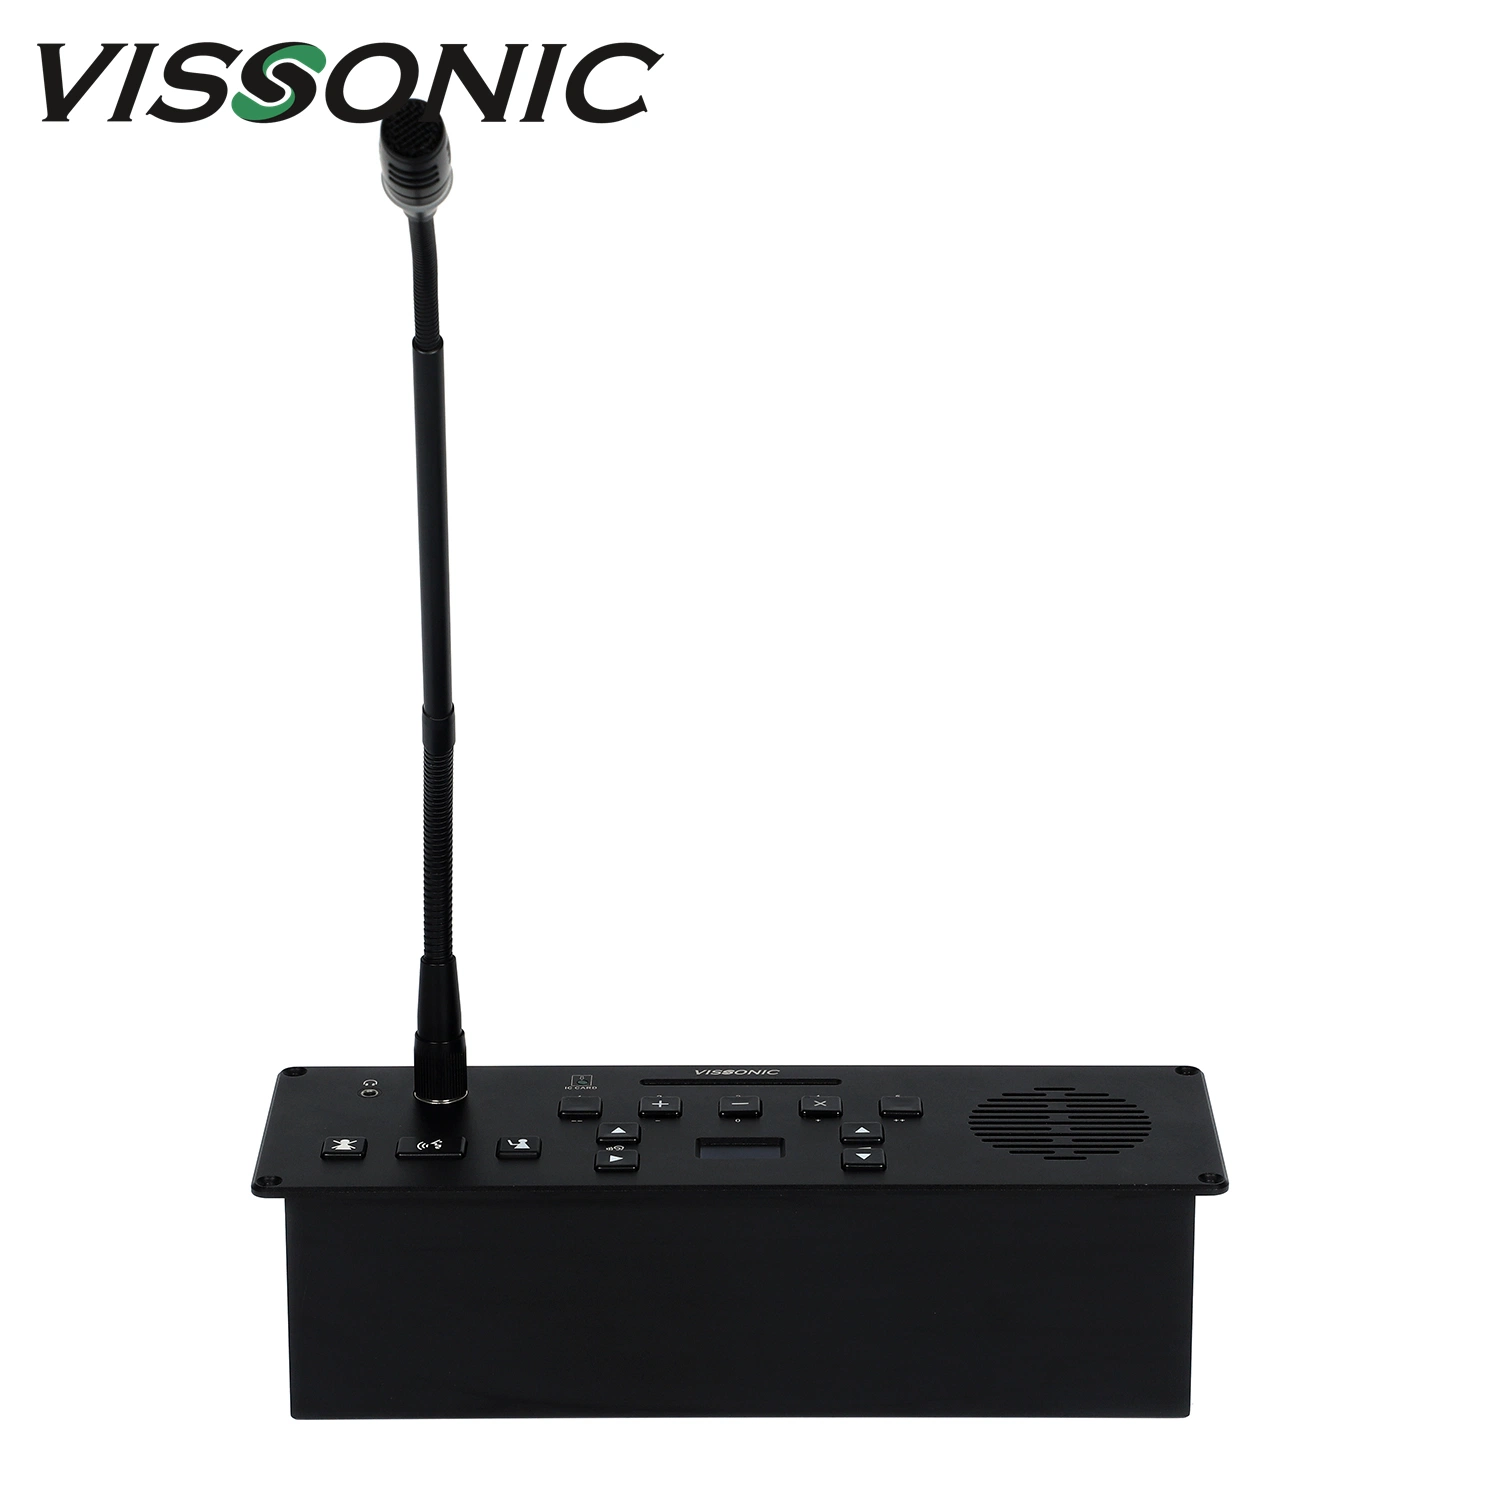 Full Digital Wired Conference System All-in-One Flush-Mounting Audio Microphones